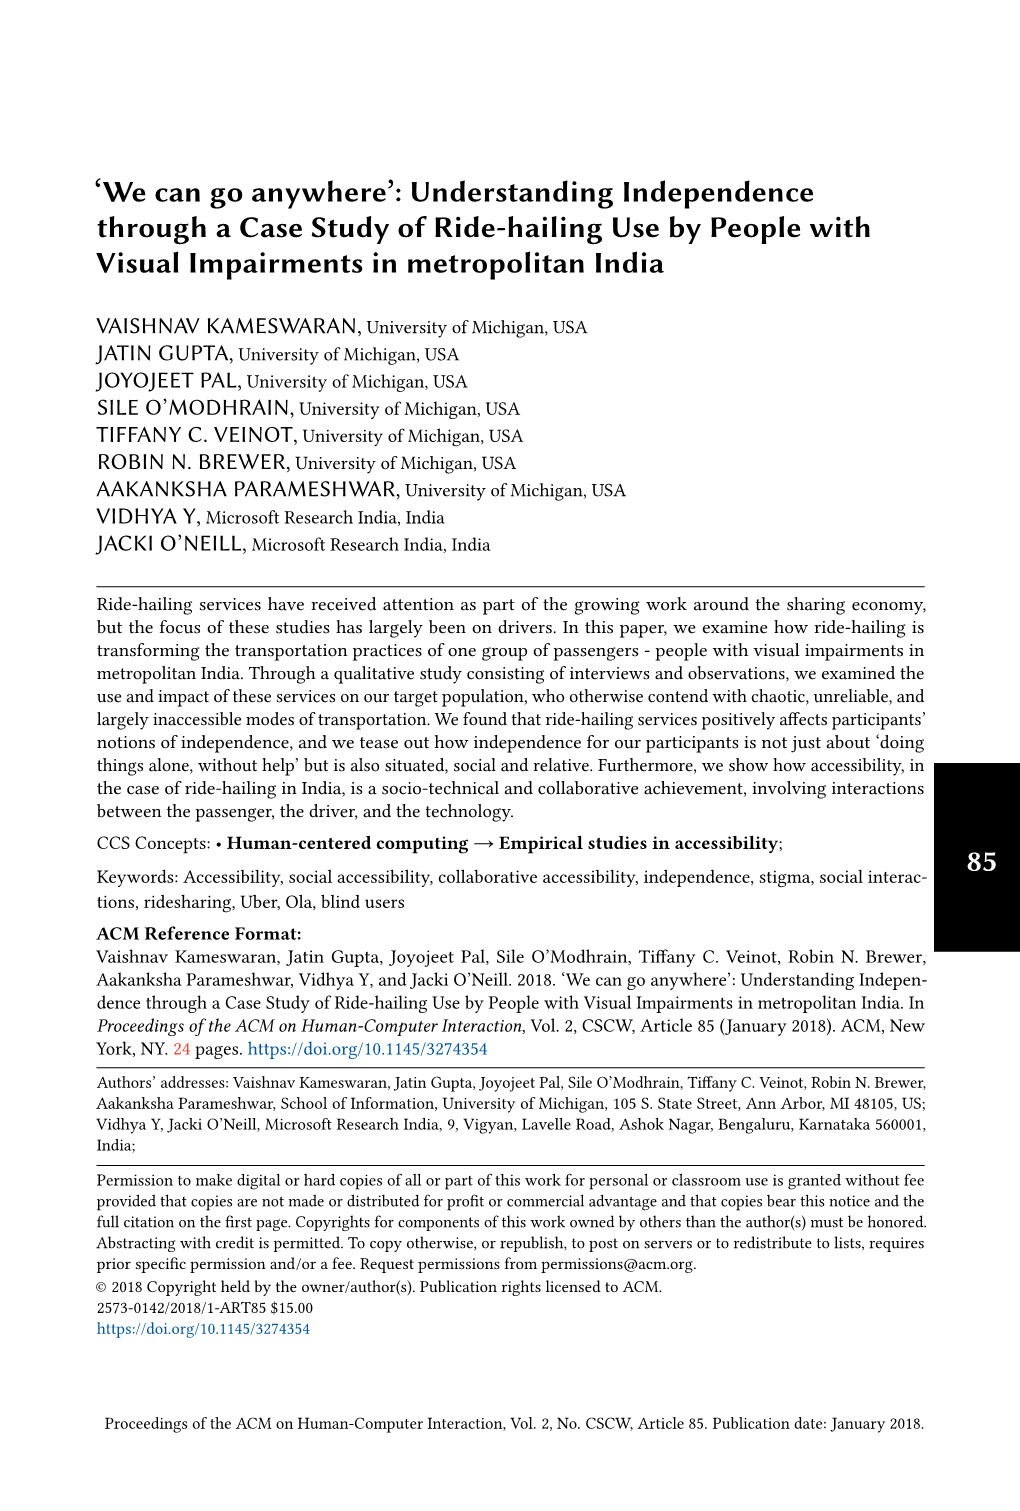 Understanding Independence Through a Case Study of Ride-Hailing Use by People with Visual Impairments in Metropolitan India